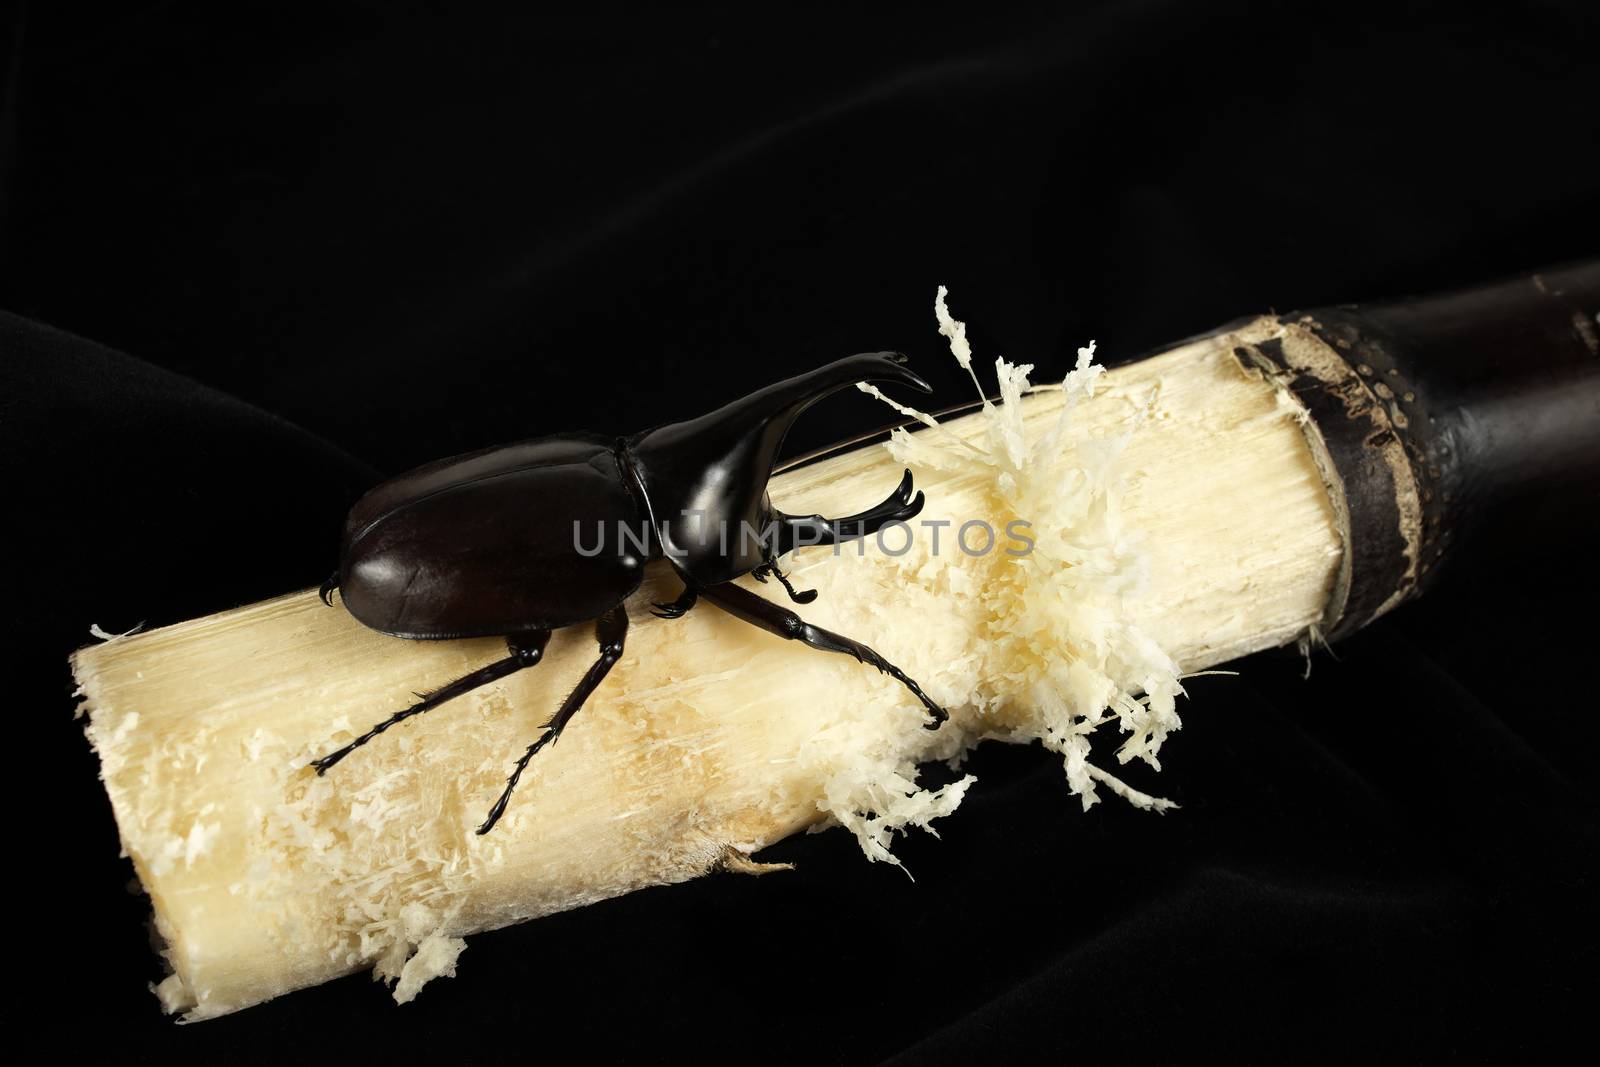 A horned beetle on a stalk of sugan cane.